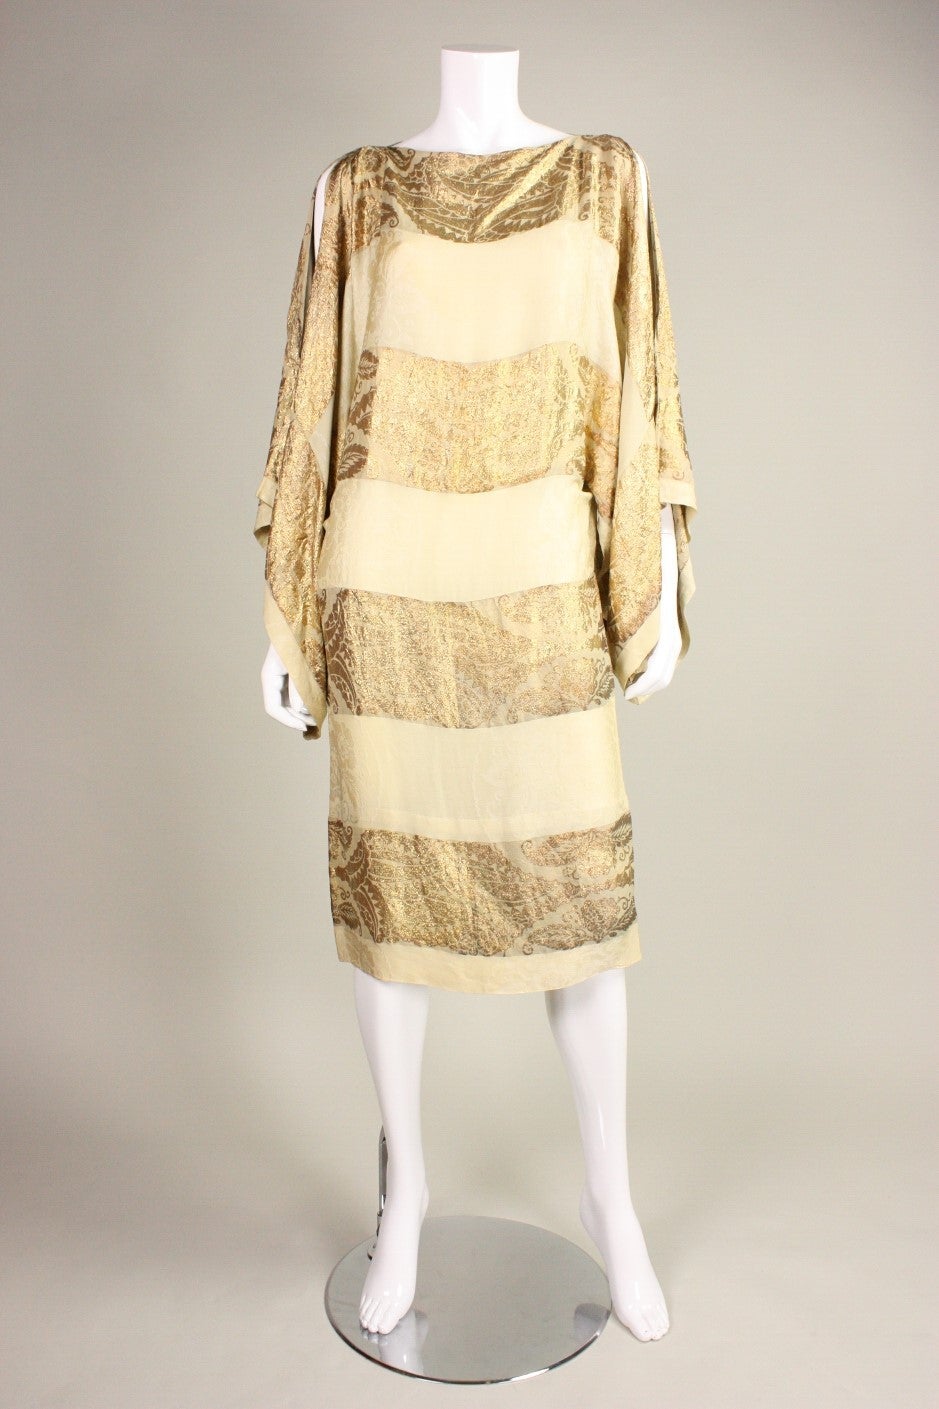 Vintage cocktail dress dates to the 1920's and is made of yellowish-green and gold lame jacquard silk fabric.  It is comprised of a simple, yet striking pattern with a bandeau neckline and extra wide sleeves with side slits.  Unlined. No